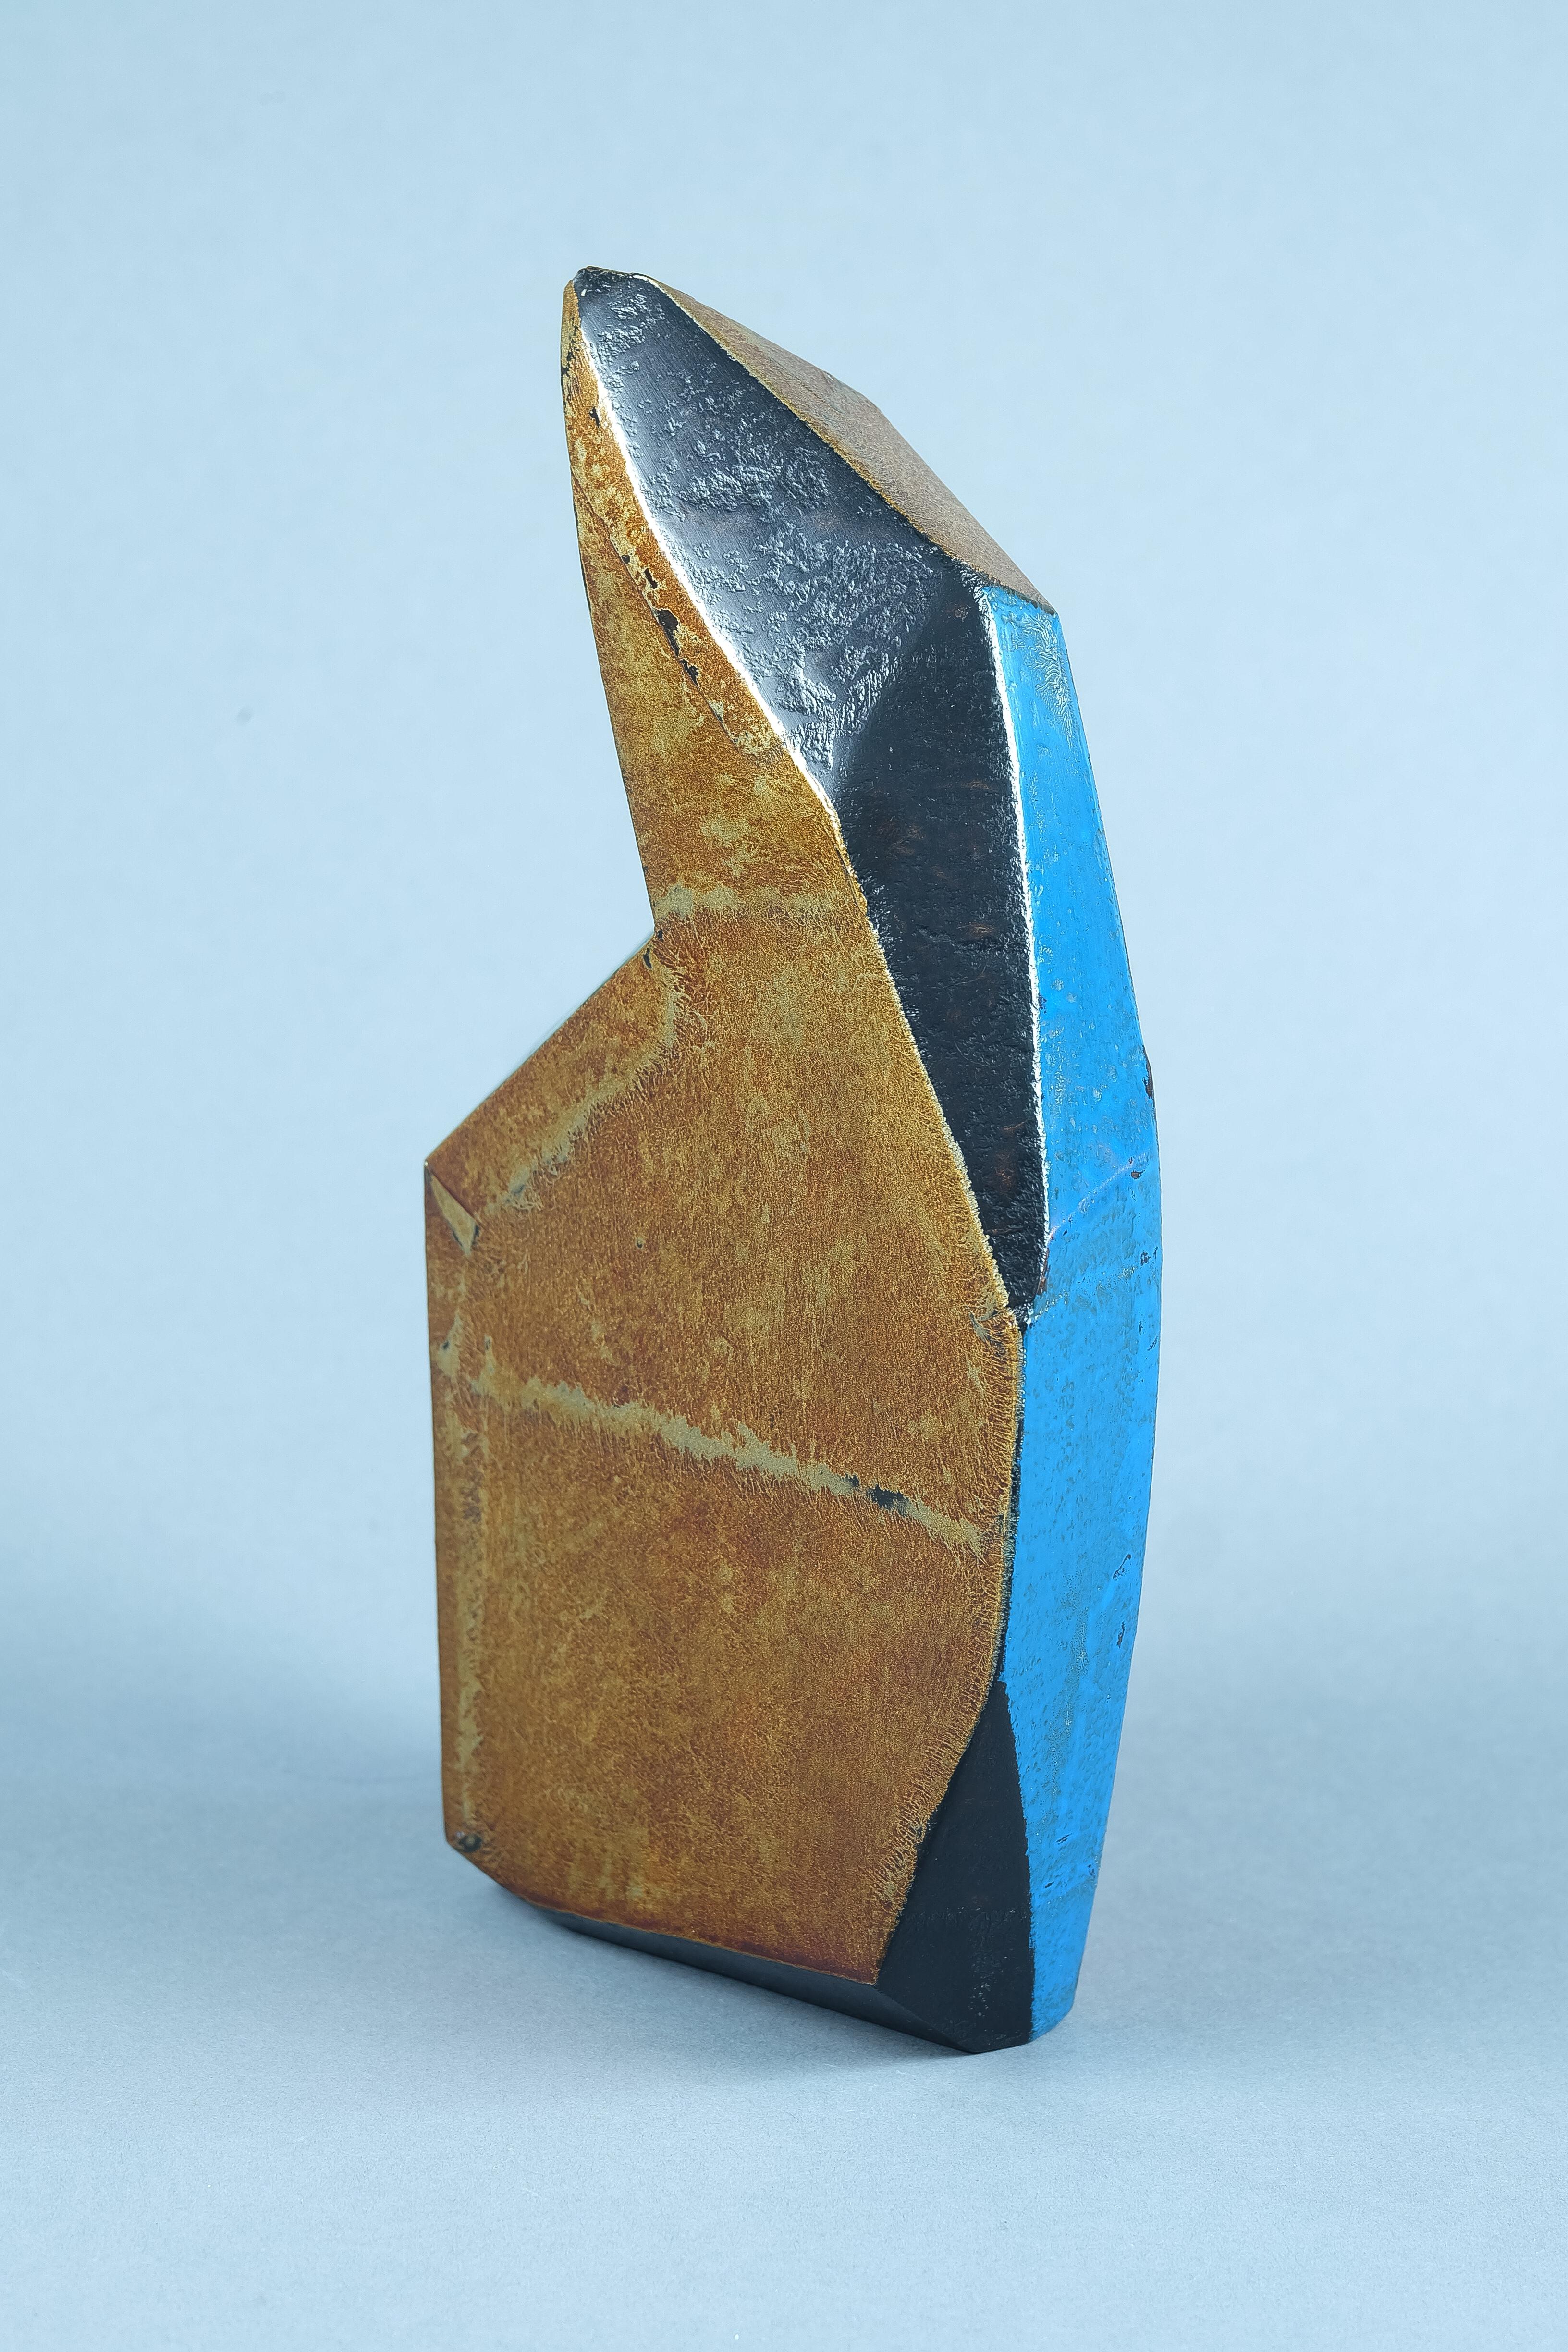 Other Contemporary Japanese Urushi Lacquer Sculpture For Sale